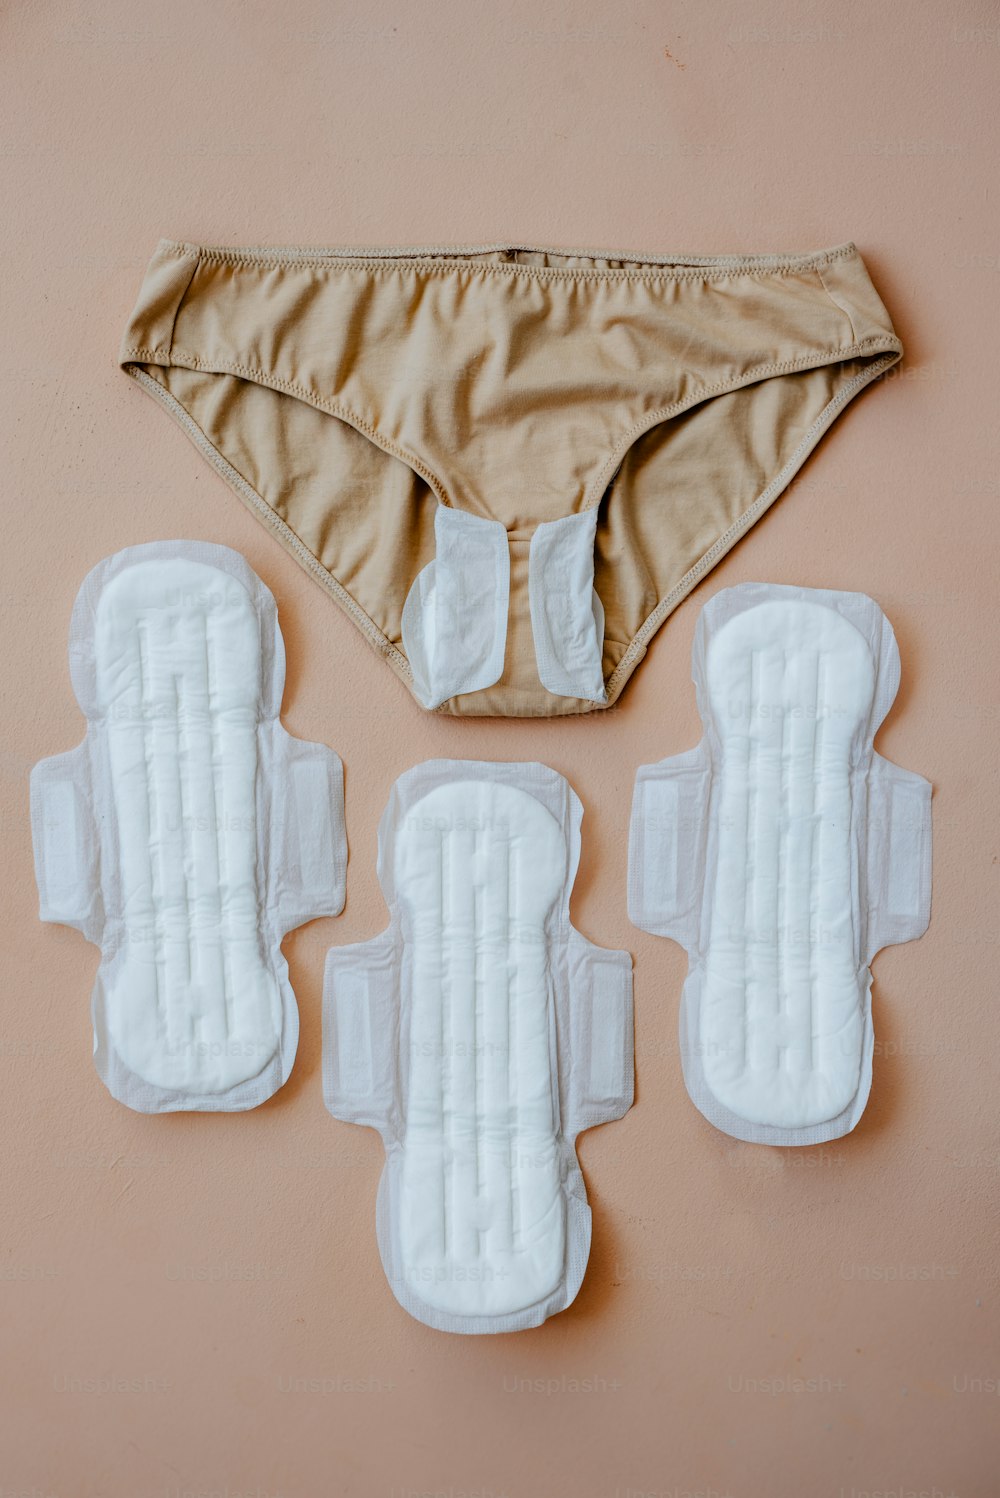 A pair of underwear and underwear pads on a pink surface photo